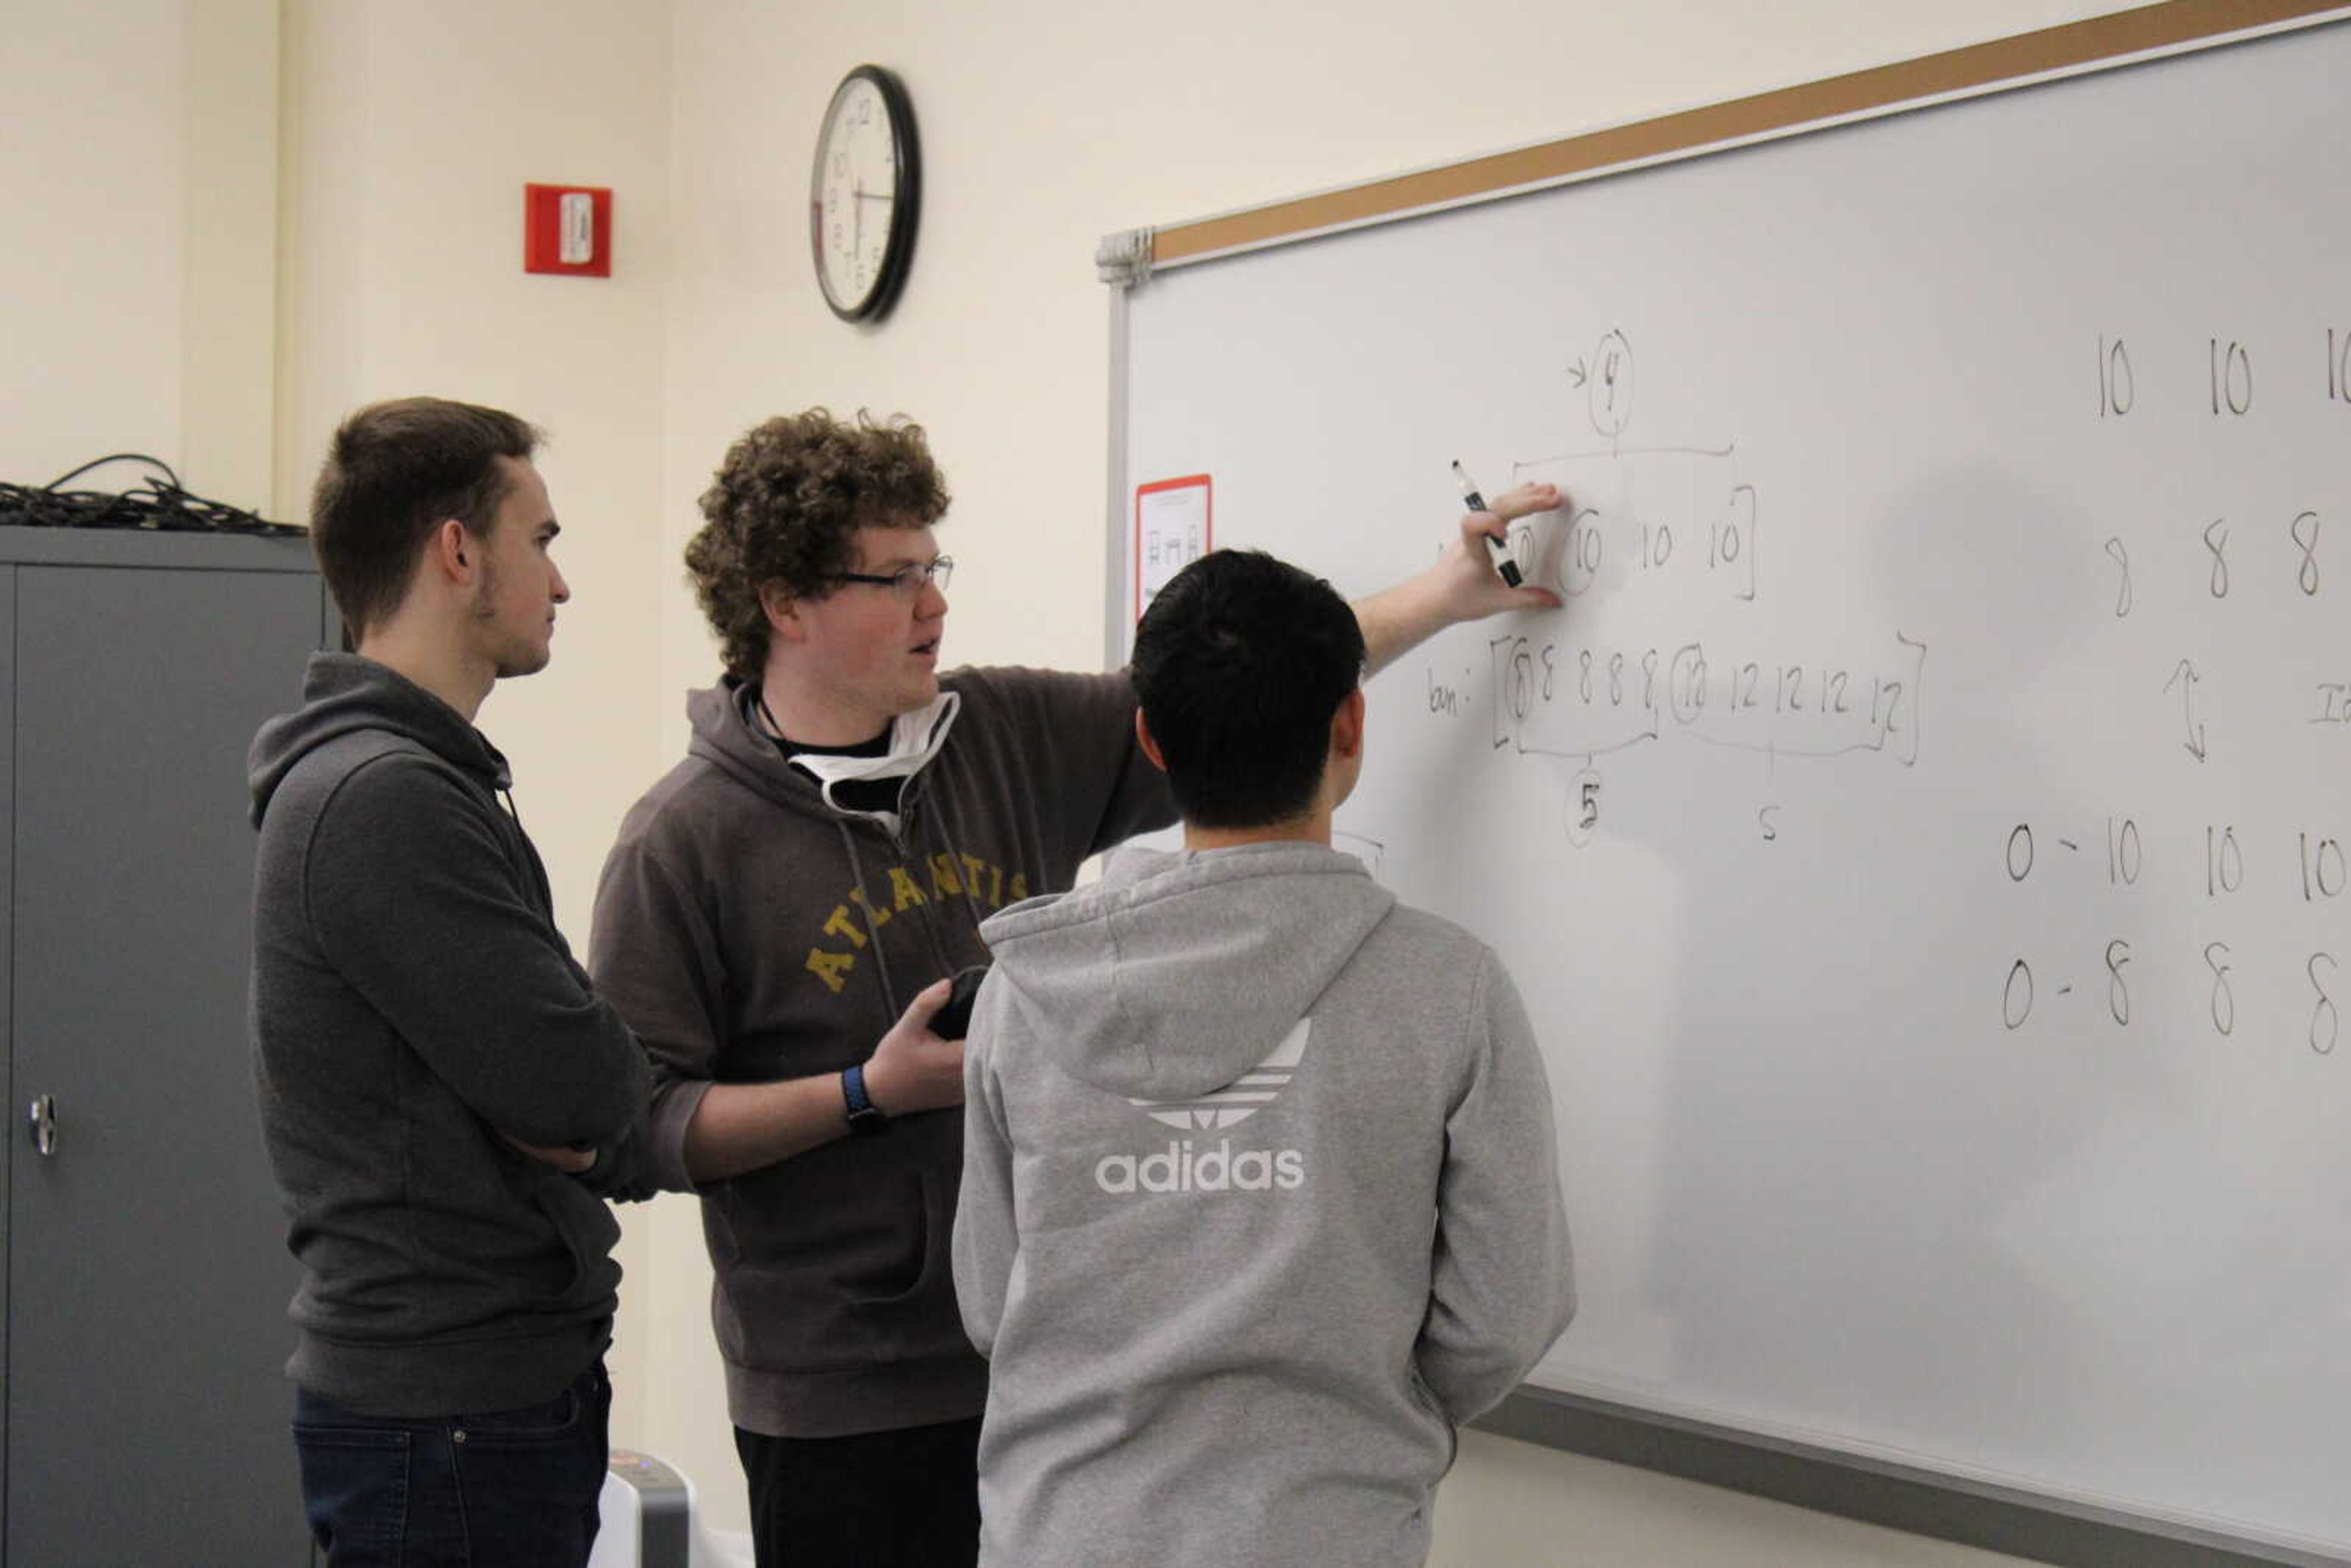 From L-R: ICPC president Alex Seredovych, vice president Blake Bleem and club member Xiao Pu work together to solve a practice programming problem. Practice problems mirror those in competitions as well as job interviews.